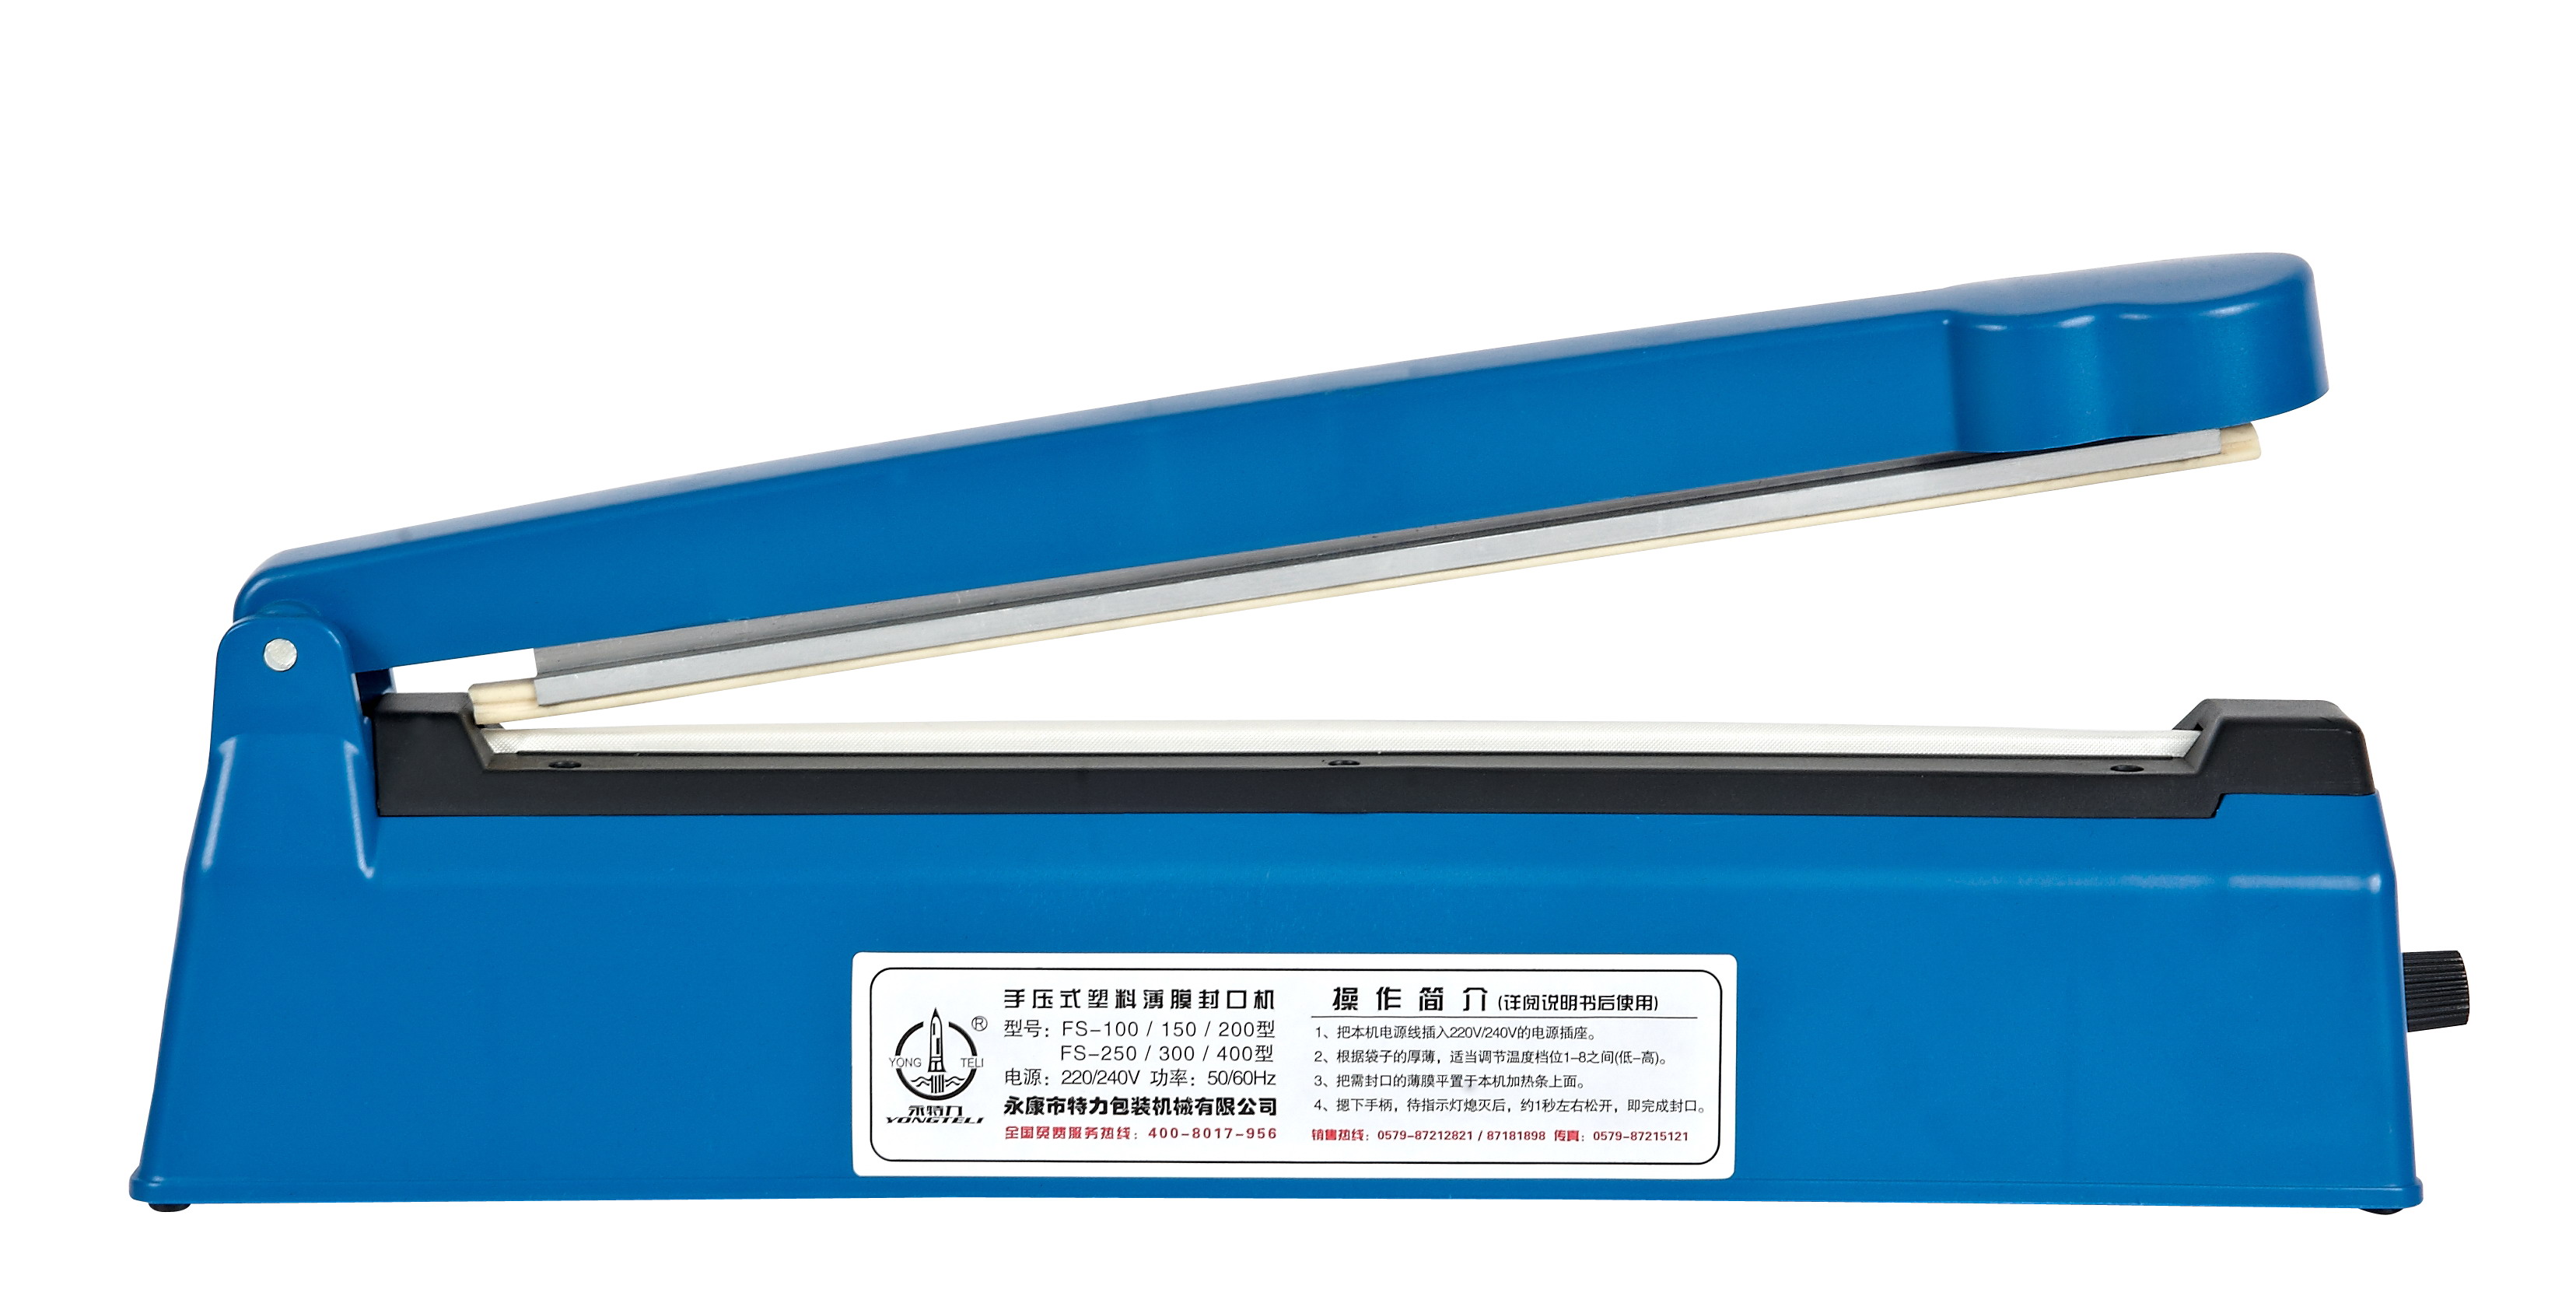 Zhejiang Tianyu industry Co. Ltd. Supplier Factory Manufacturer Manufacture and Sale Manual Sealing 2 mm Width Impulse Poly Tubing Bag Sealer PFS Series Hand Plastic Film Heat Machine